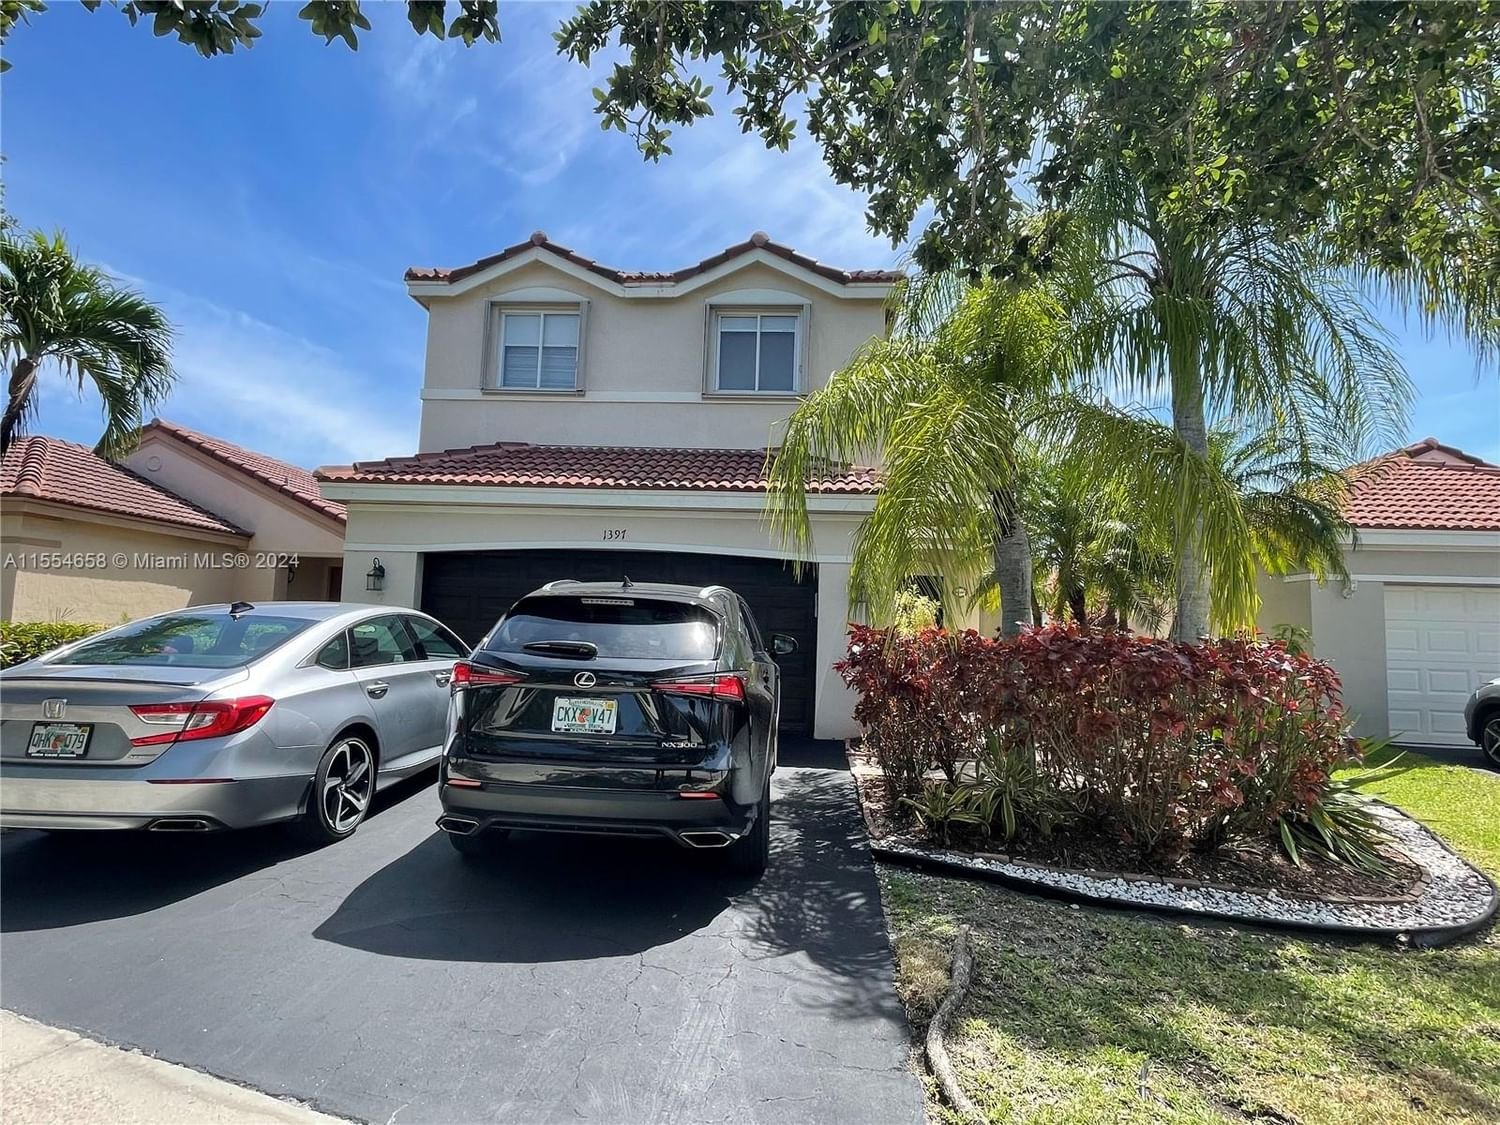 Real estate property located at 1397 Majesty Ter, Broward County, SECTOR 2-PARCELS 21A 25 2, Weston, FL